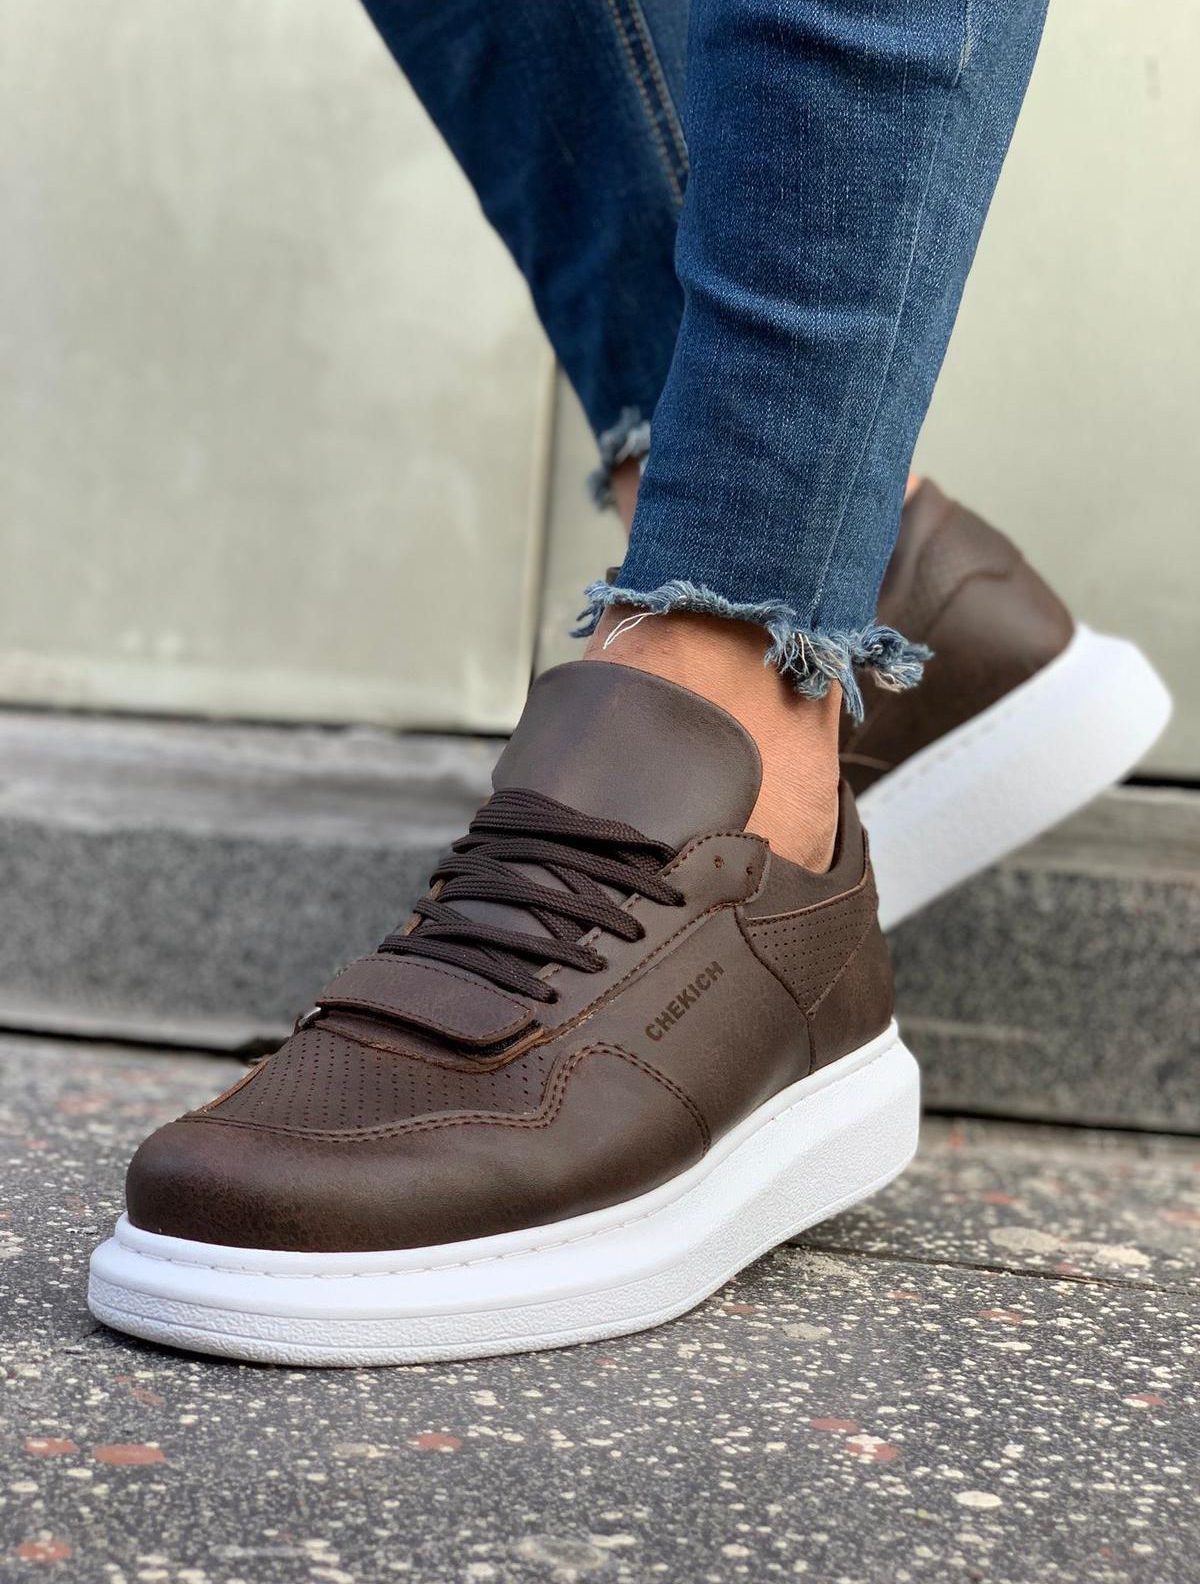 Chekich Men's Shoes Black Color Lace Up Artificial Leather Spring and Autumn Seasons Sneakers Casual Breathable Vulcanized Lightweight Velcro Band Odorless Comfortable Suits Office White High Sole CH073 V6